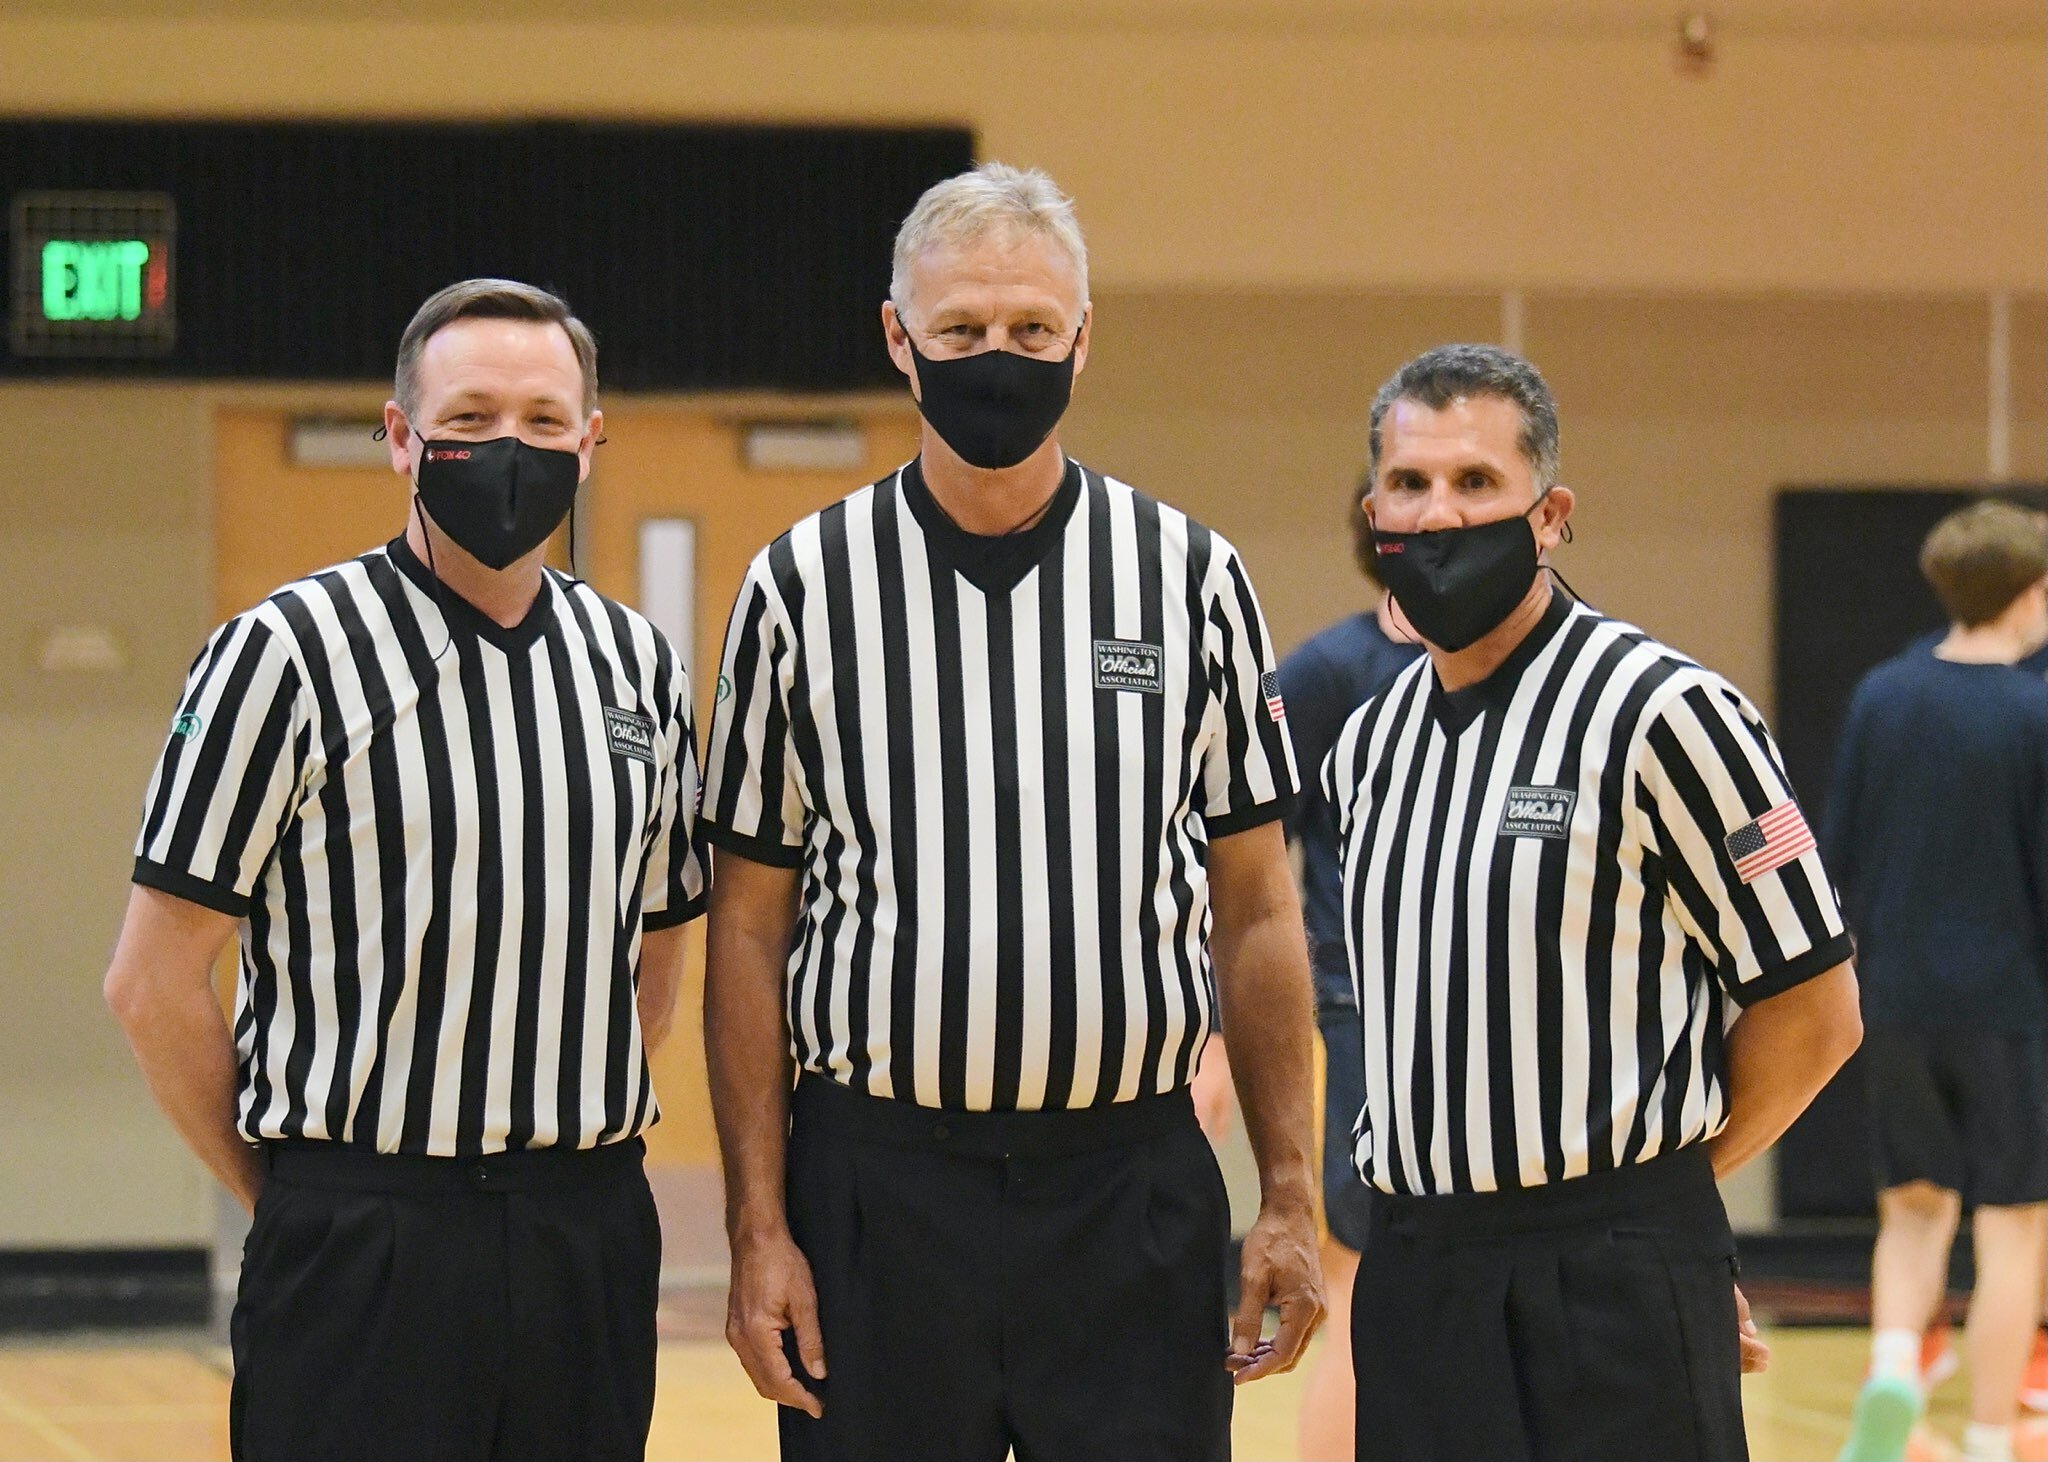 Heath Powell, Neil Anderson, and John Matteo prepare to officiate a basketball game in the pandemic. Anderson is a basketball and soccer official with decades of experience. There are fewer officials for high school sports these days. Photo courtesy Kris Cavin